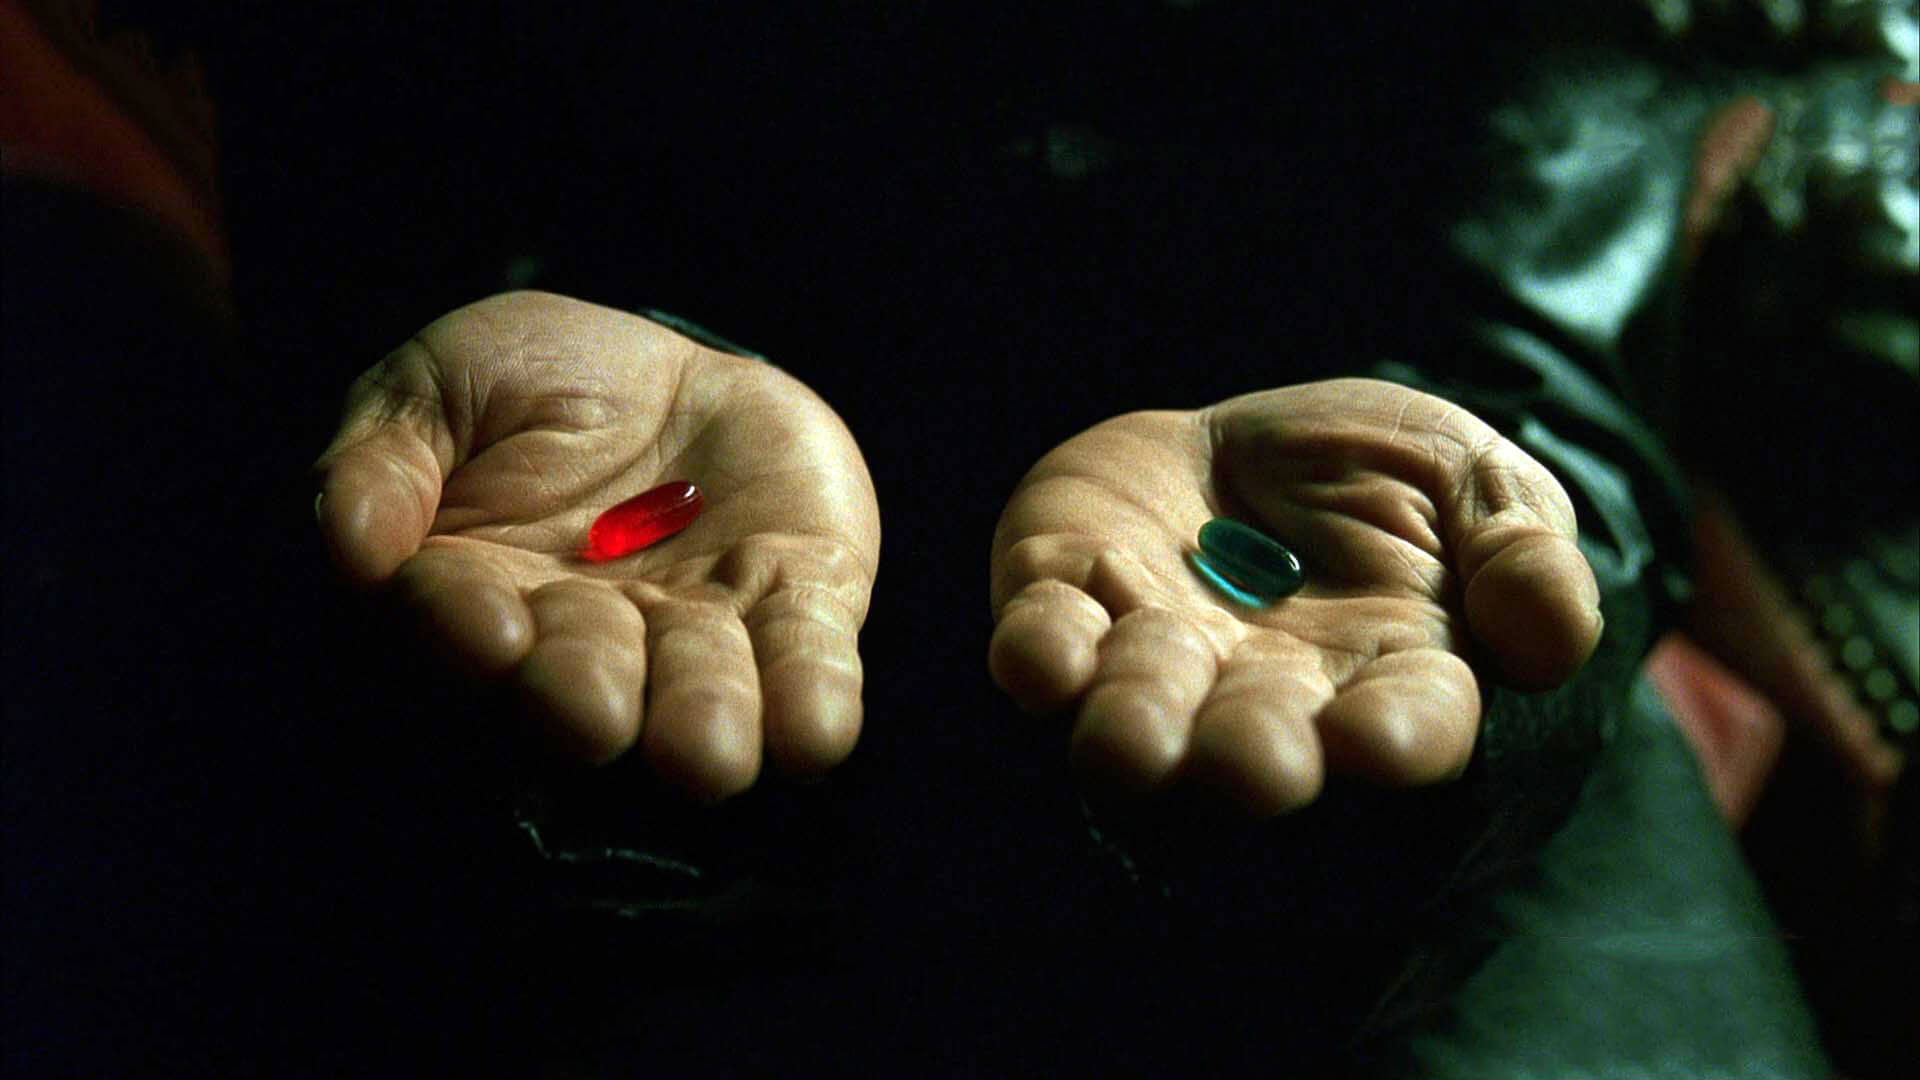 My baby a blue pill or a red pill. 